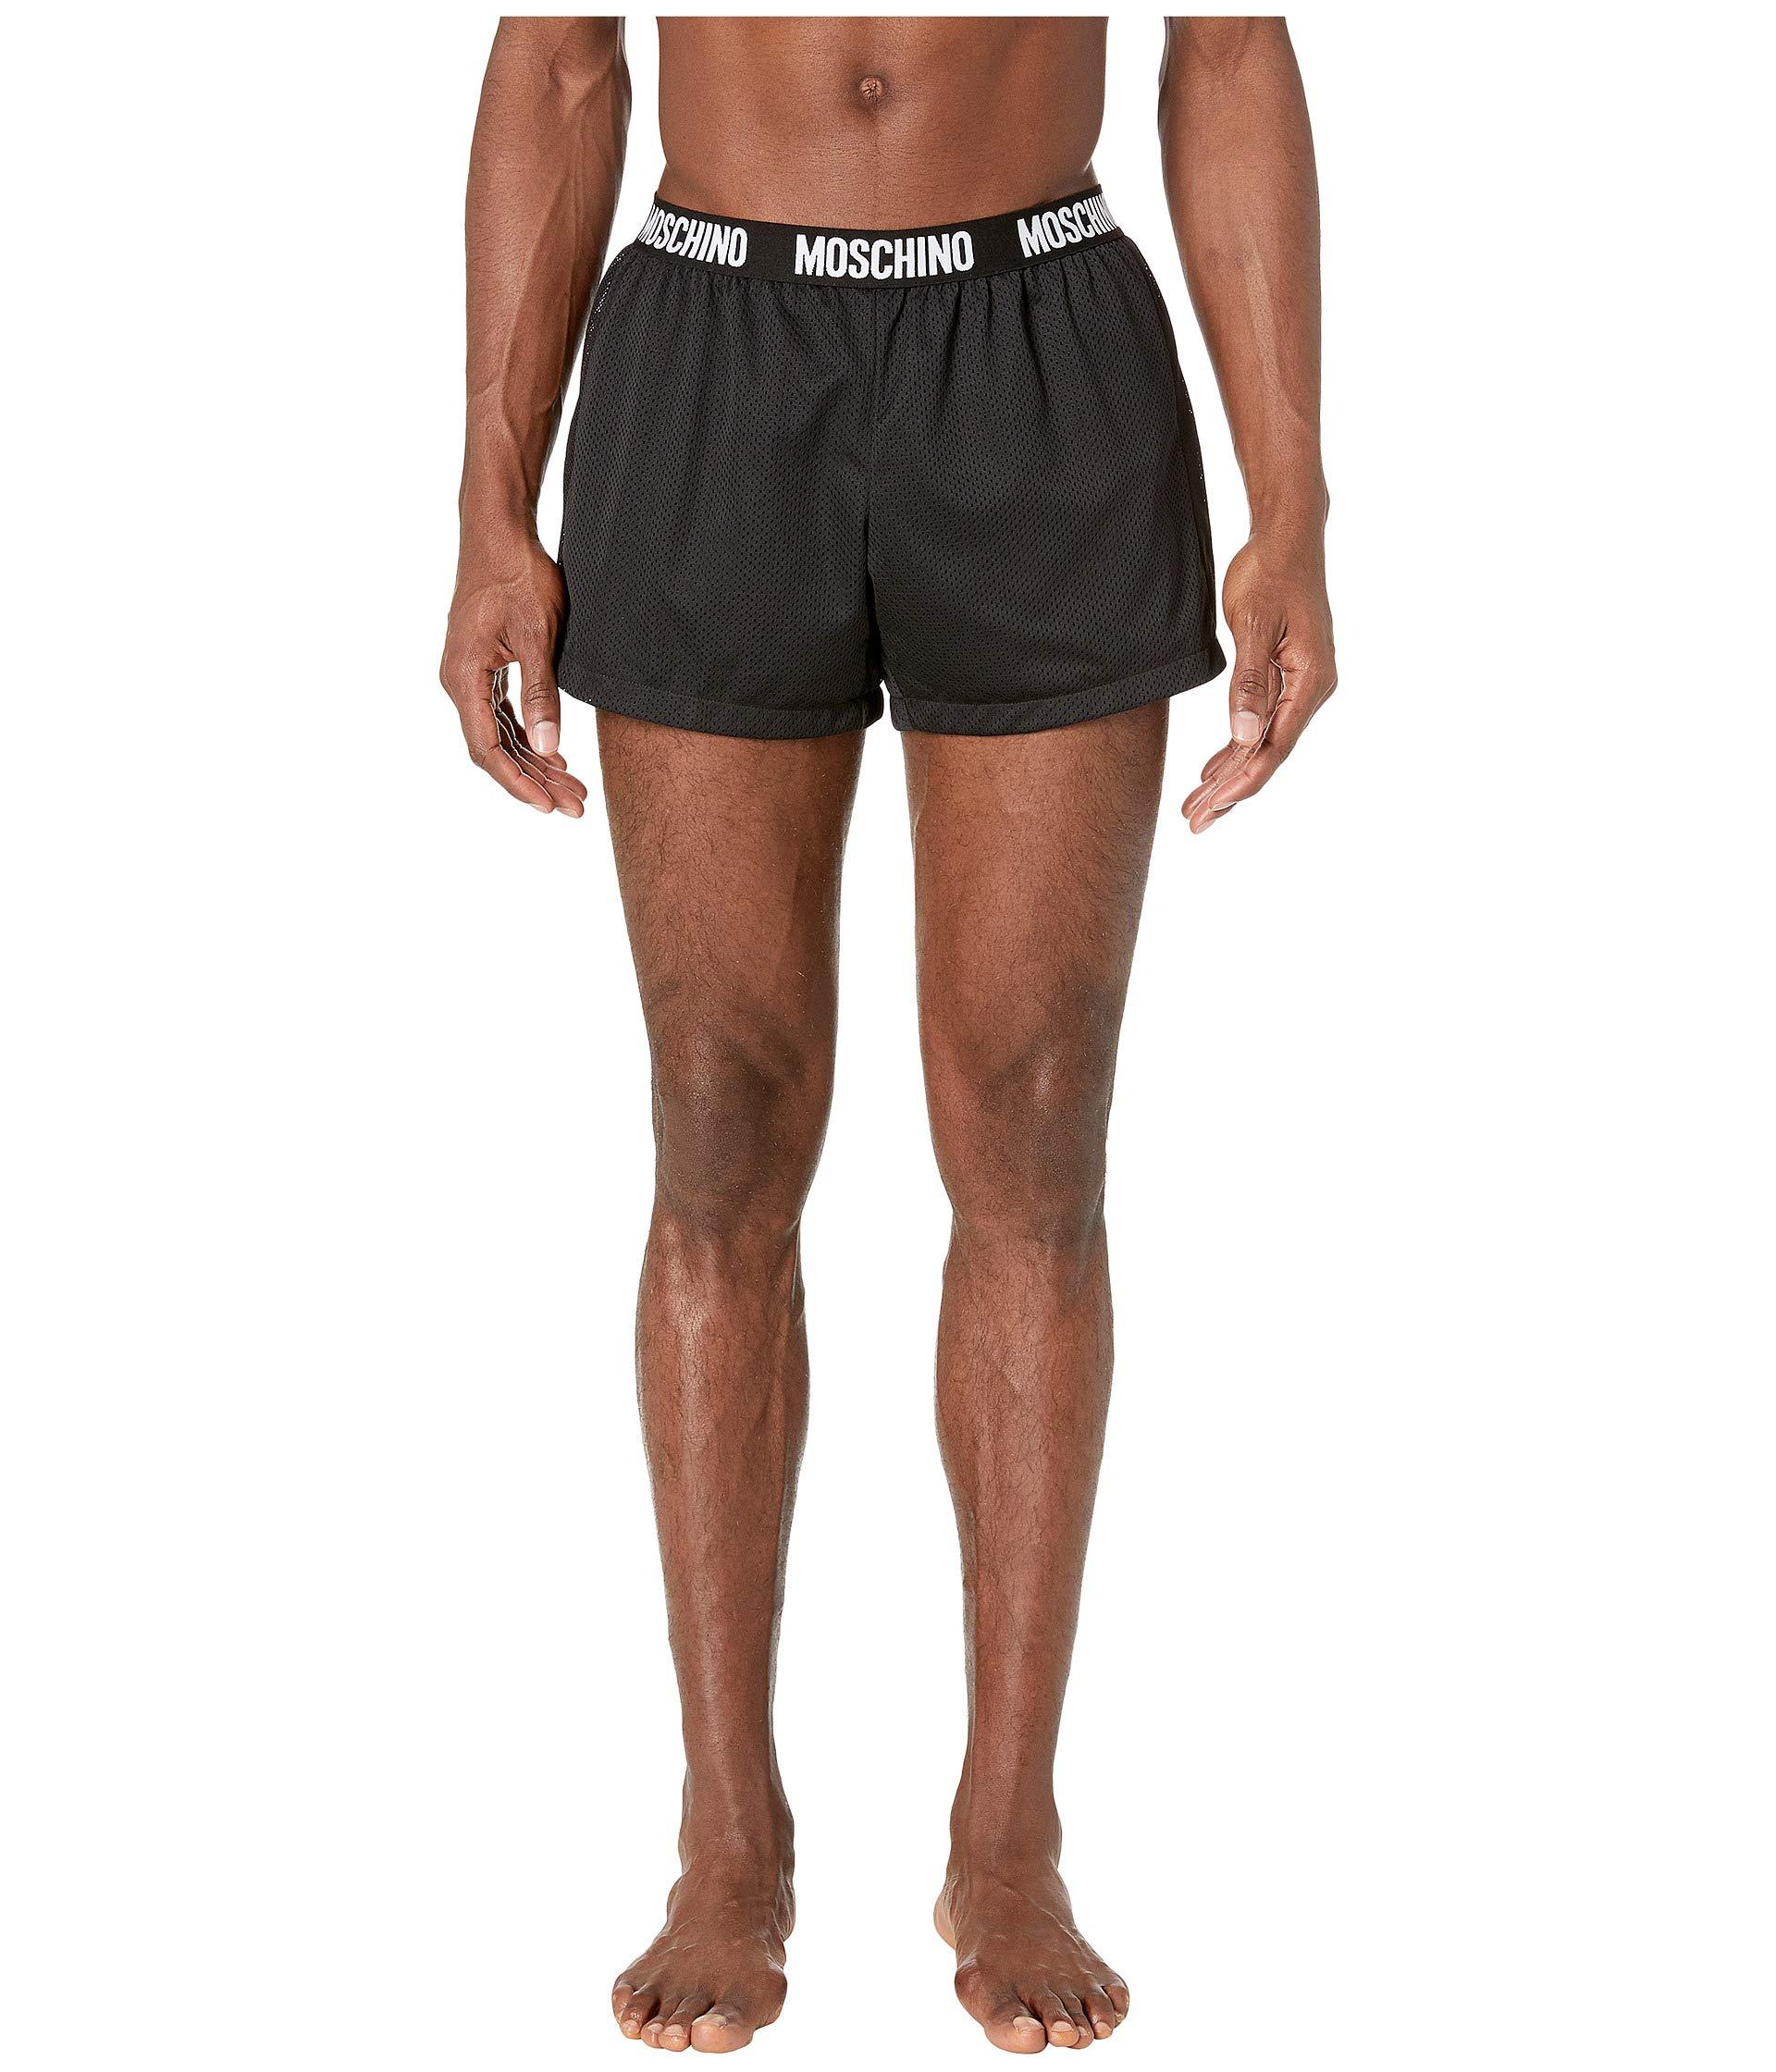 Moschino Synthetic Mesh Swim Shorts in Black for Men - Lyst